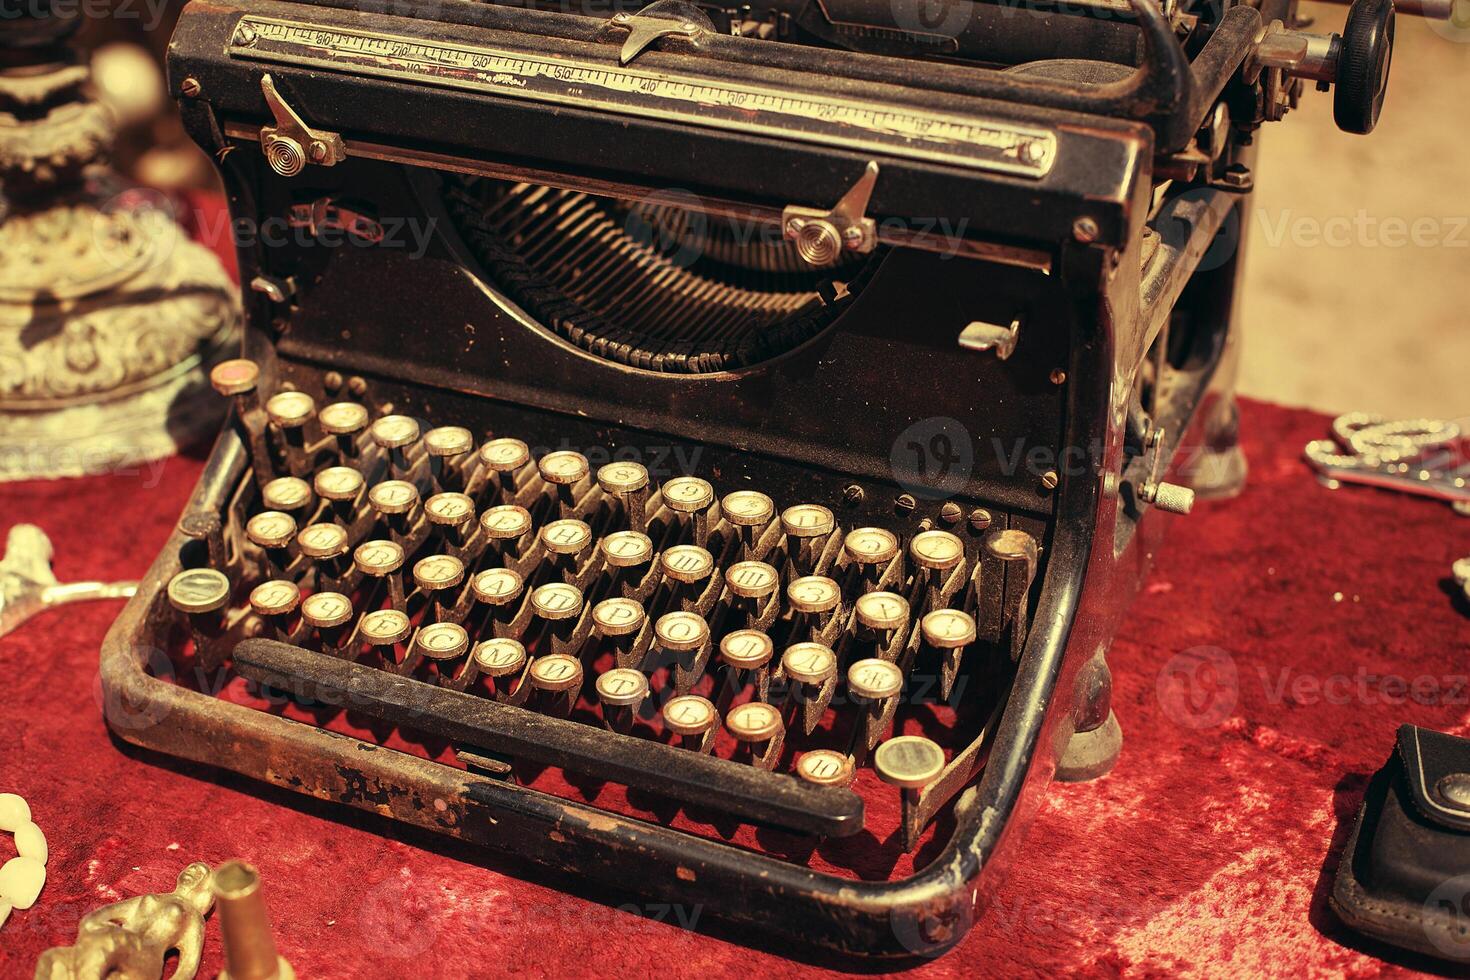 retro typewriter on a red tablecloth for sale at a flea market photo